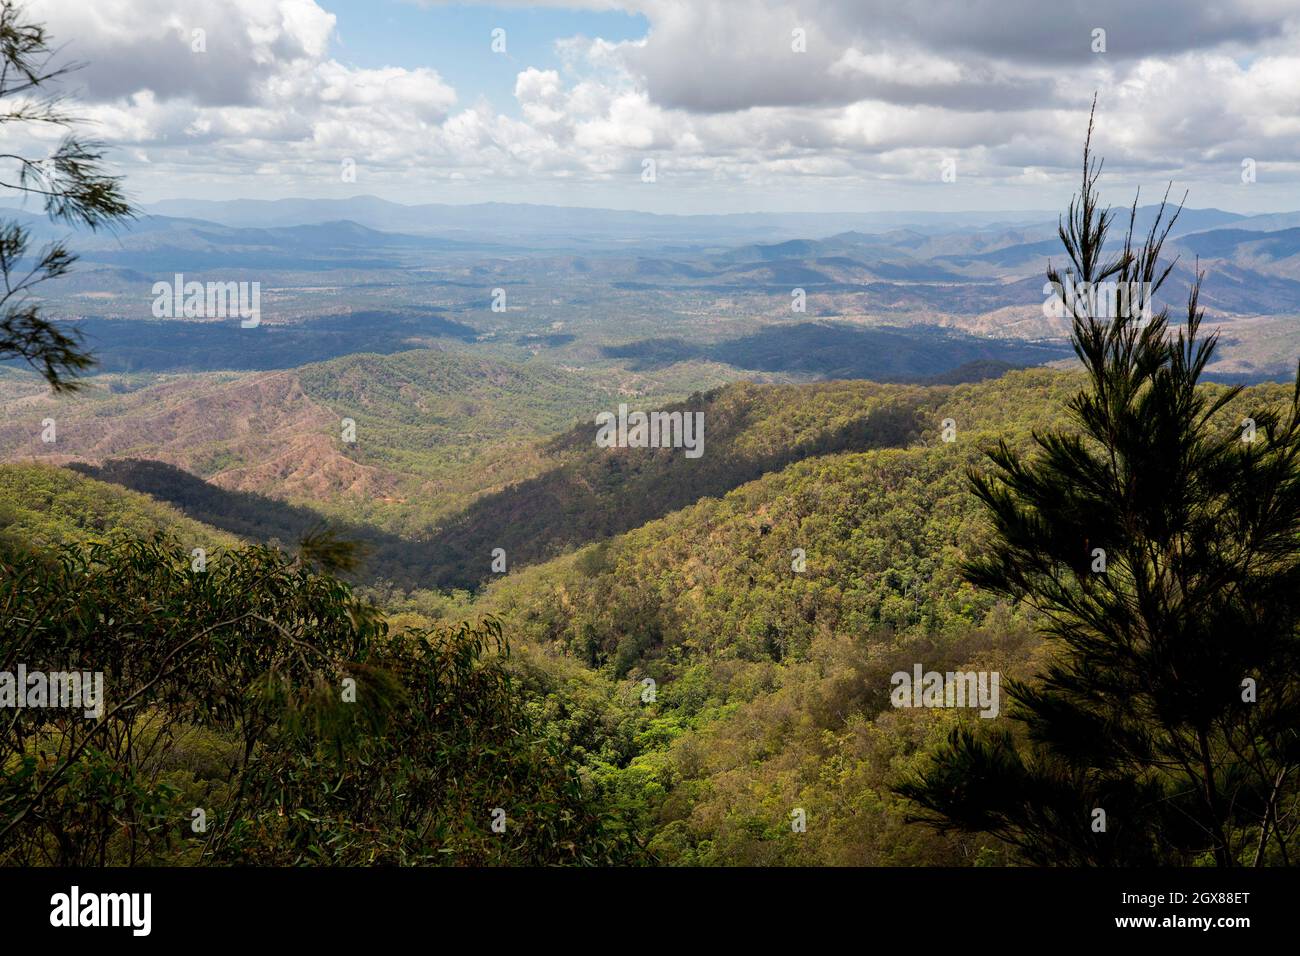 View of forested landscape with hills stretching to the horizon at Kroombit Tops National Park in the  Great Dividing Range, Australia Stock Photo